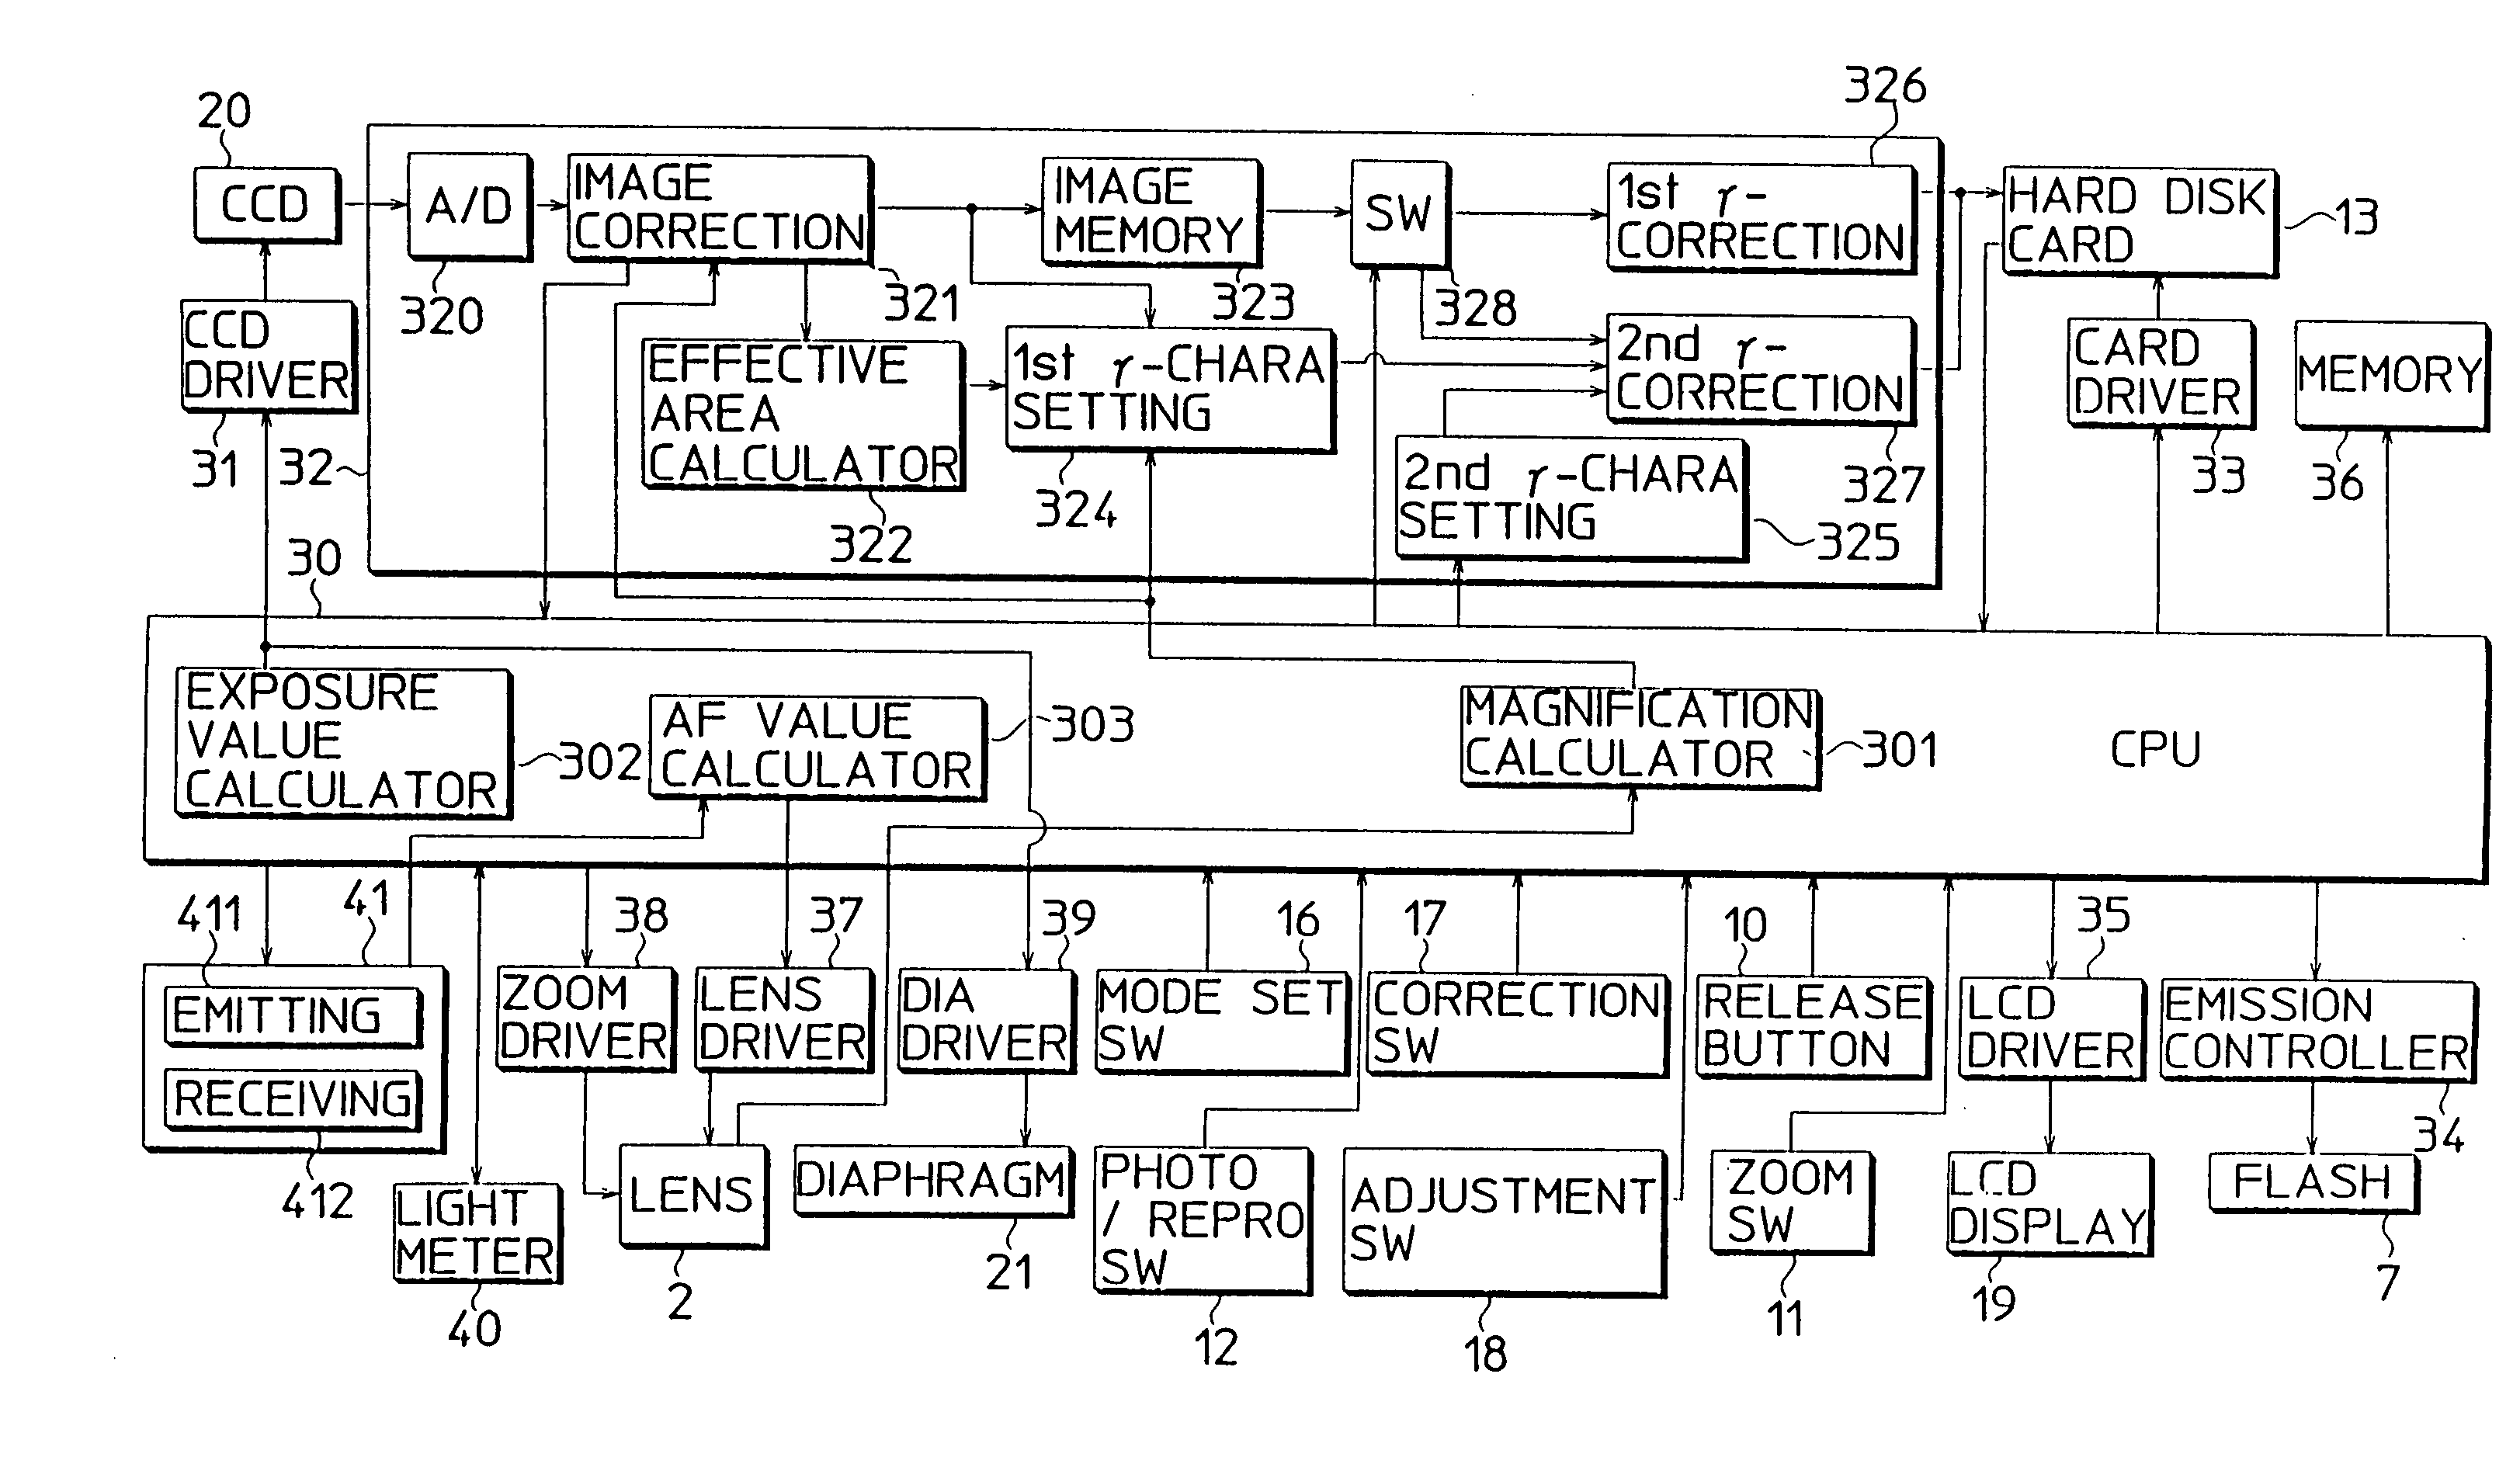 Image capturing apparatus provided with image processor